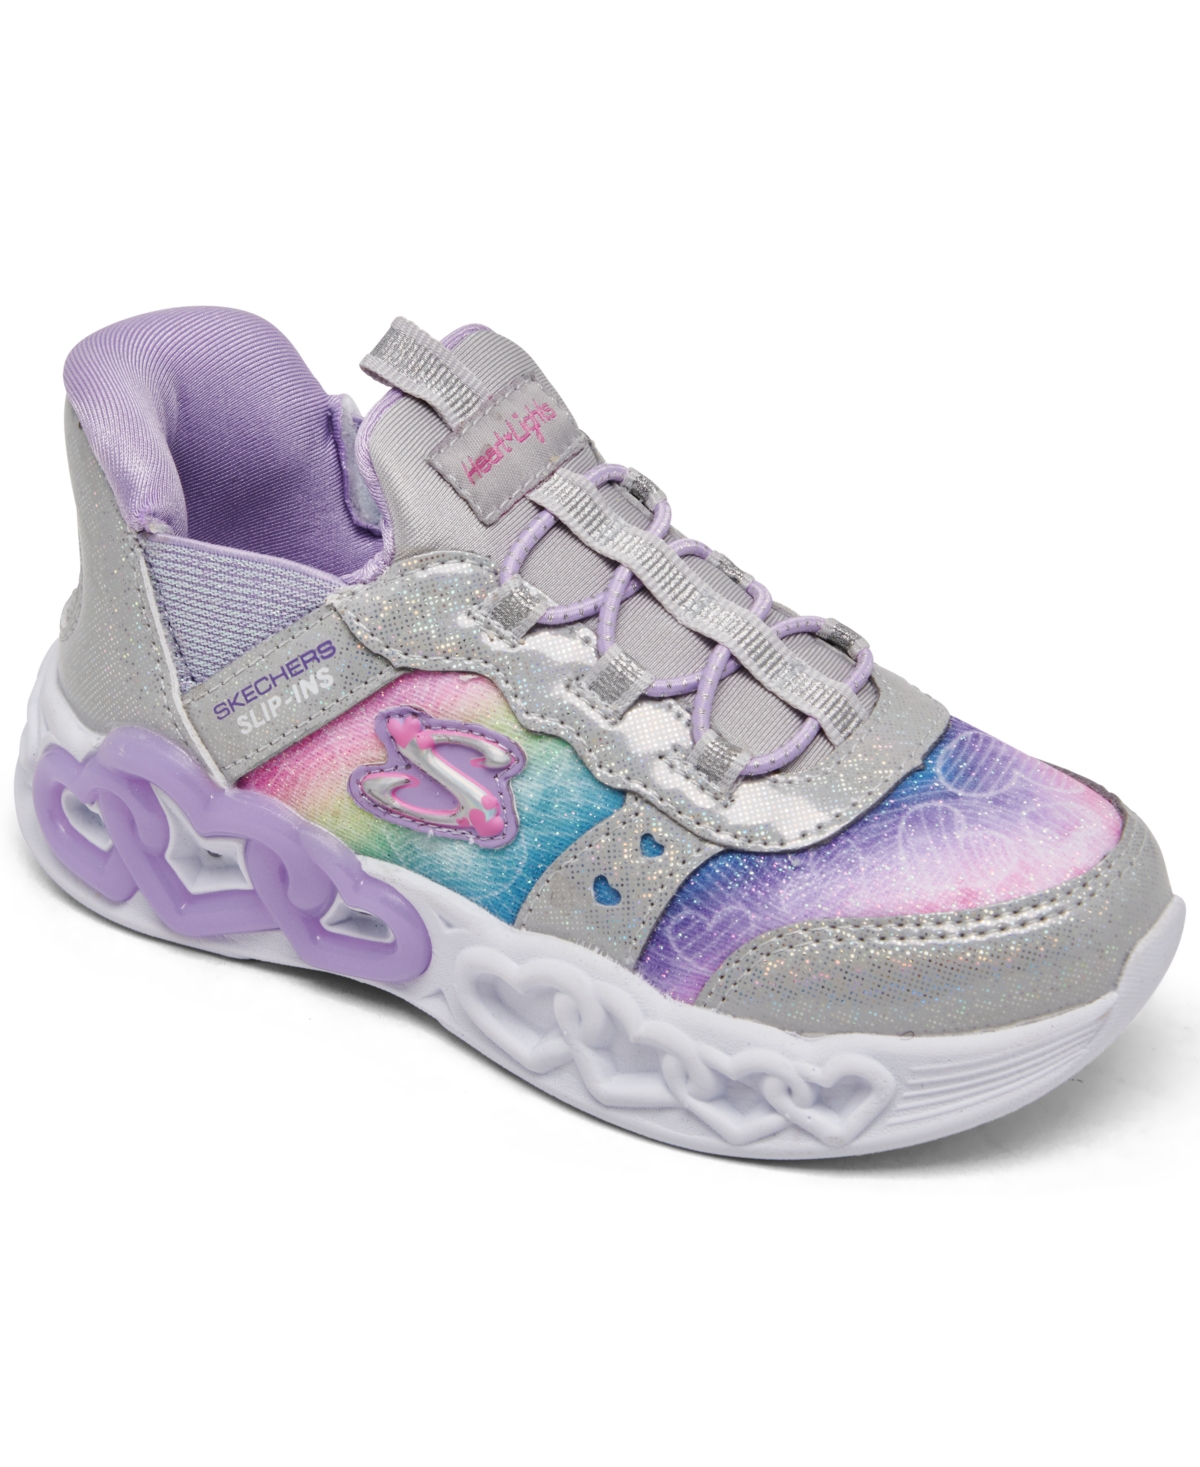 Skechers Babies' Toddler Girls Slip-ins- Infinite Heart Lights Light-up Casual Sneakers From Finish Line In Silver,multi